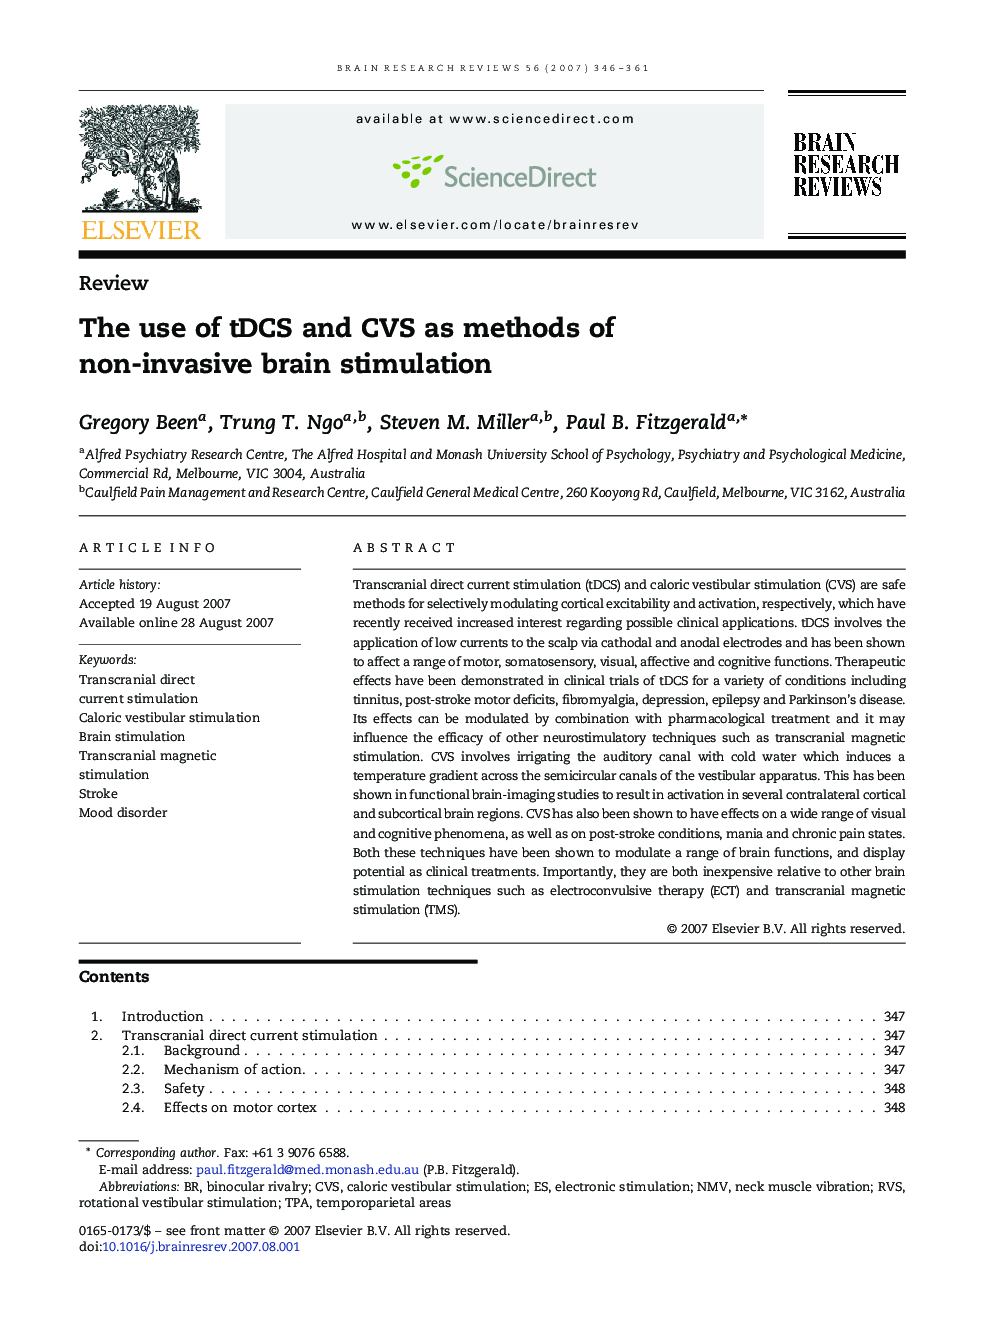 The use of tDCS and CVS as methods of non-invasive brain stimulation